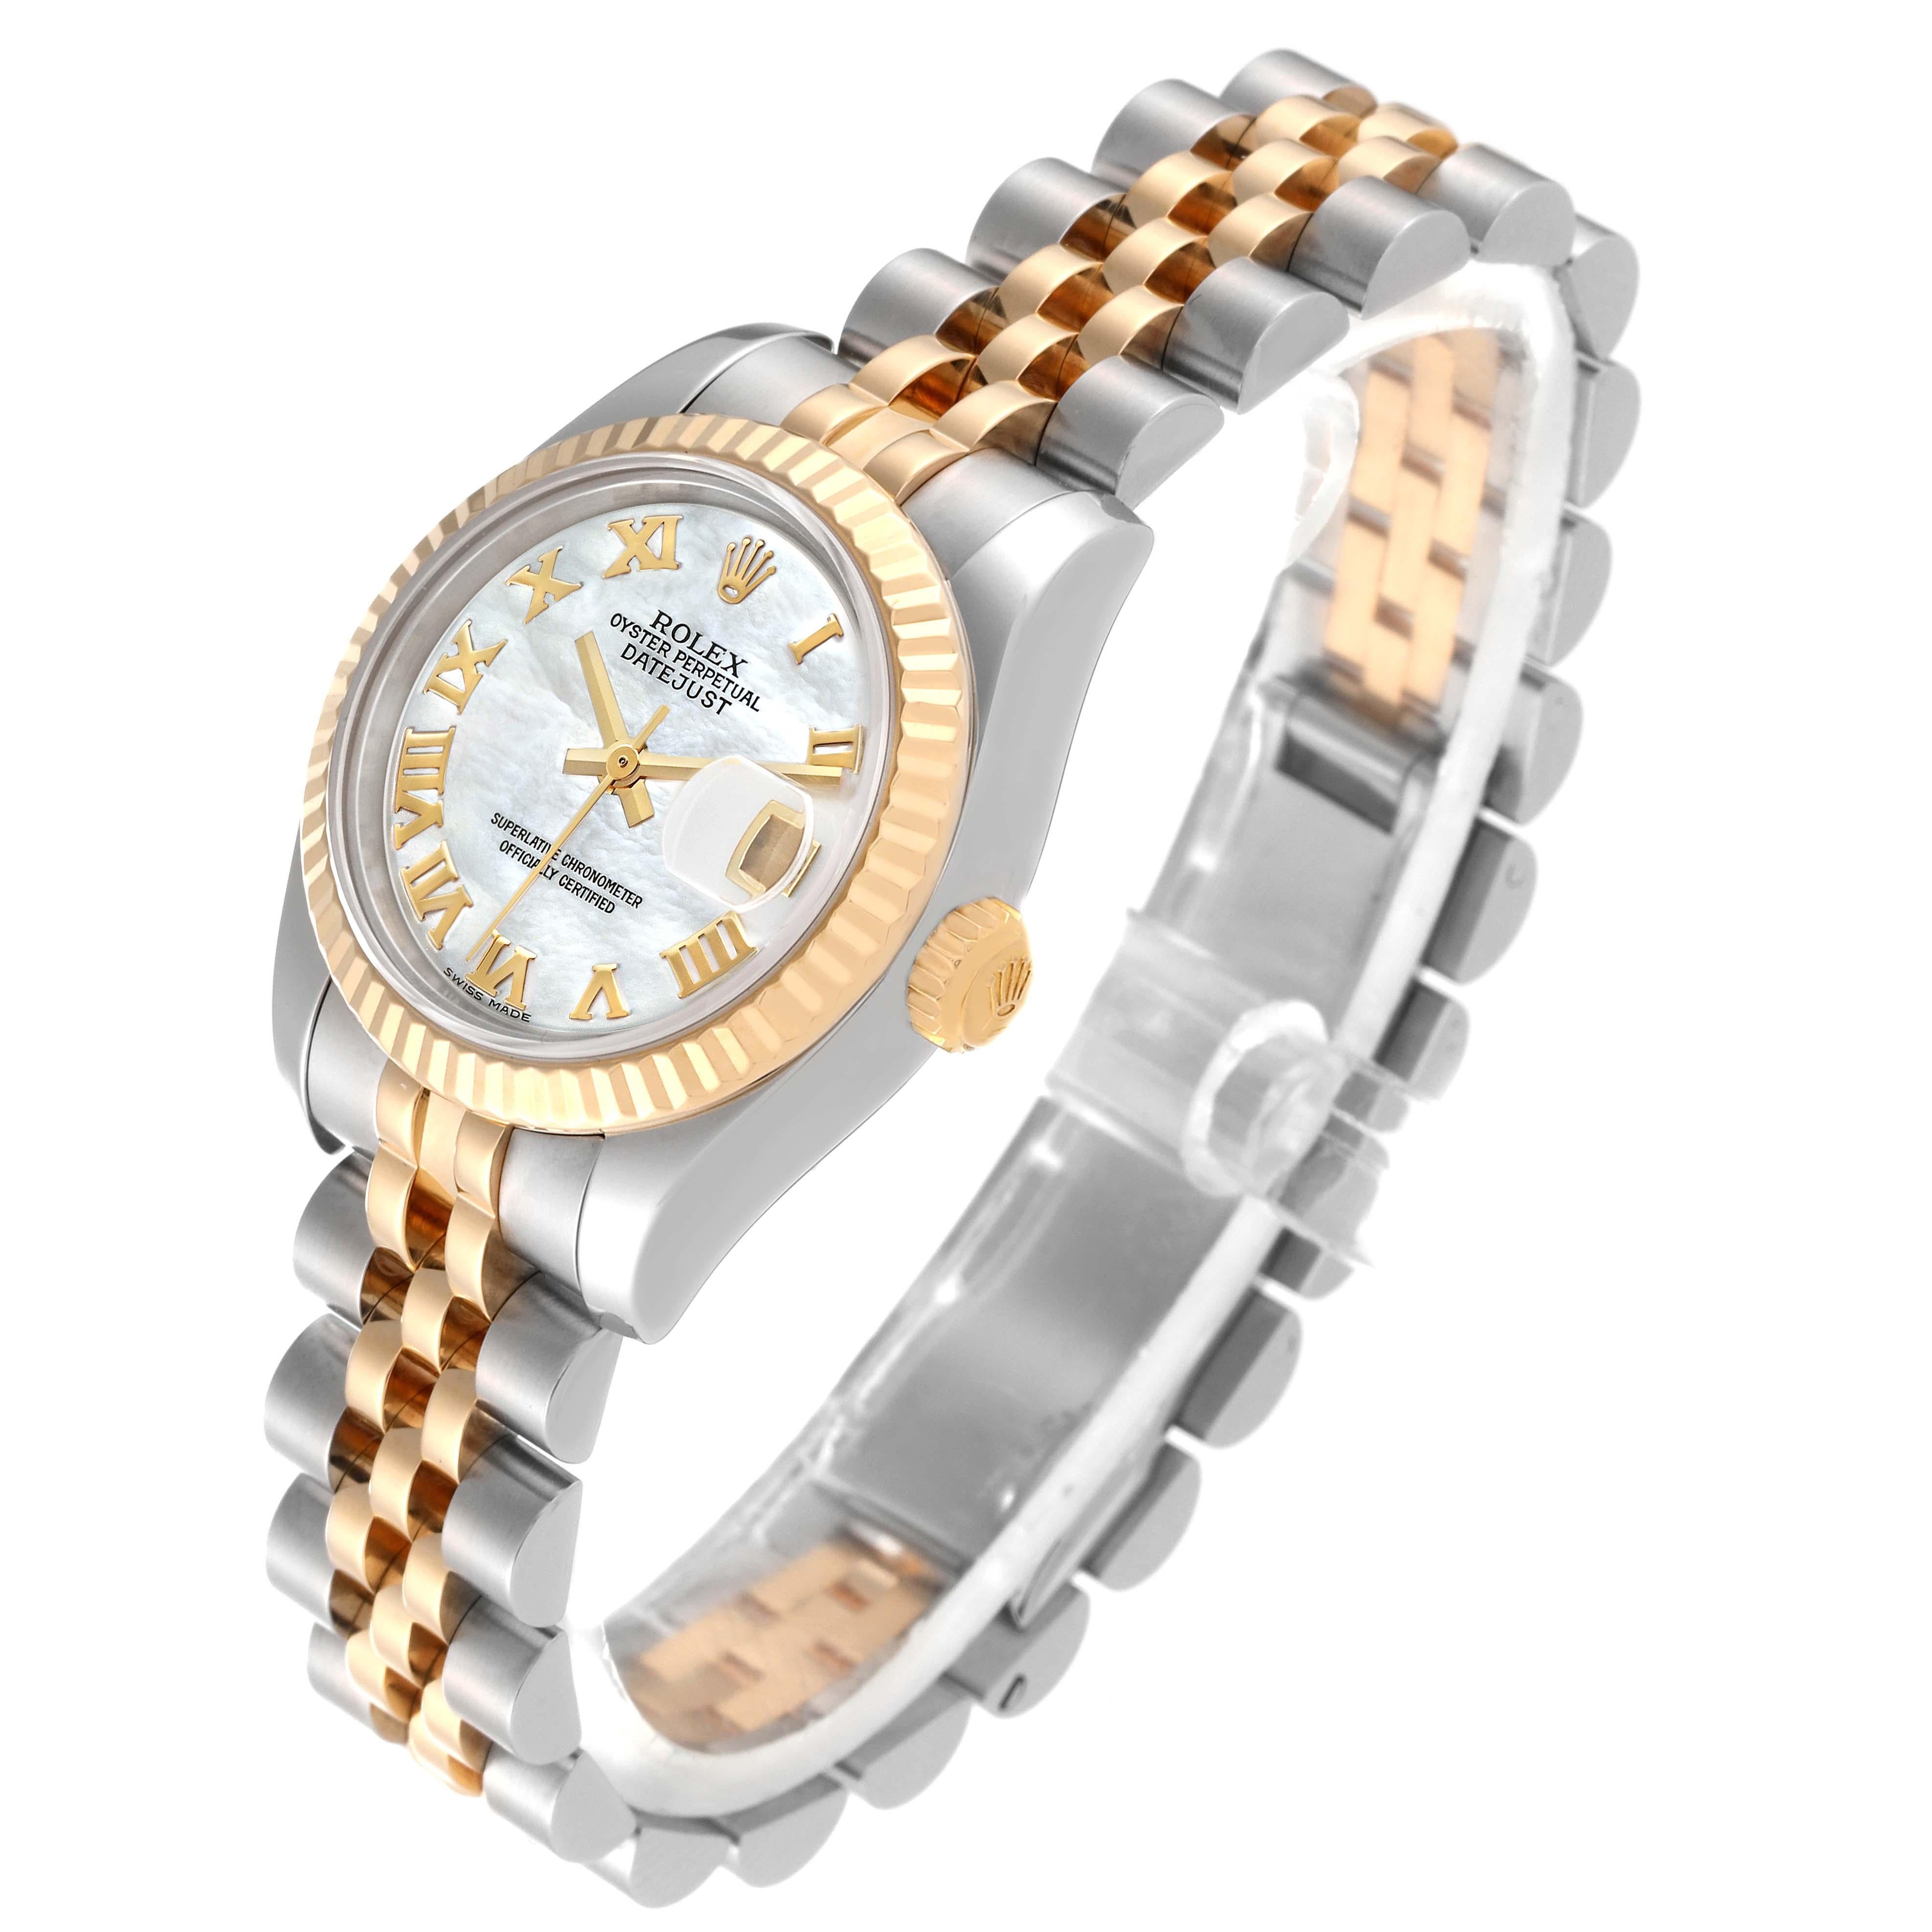 Rolex Datejust Steel Yellow Gold Mother Of Pearl Dial Ladies Watch 179173. Officially certified chronometer automatic self-winding movement. Stainless steel oyster case 26 mm in diameter. Rolex logo on a 18K yellow gold crown. 18k yellow gold fluted